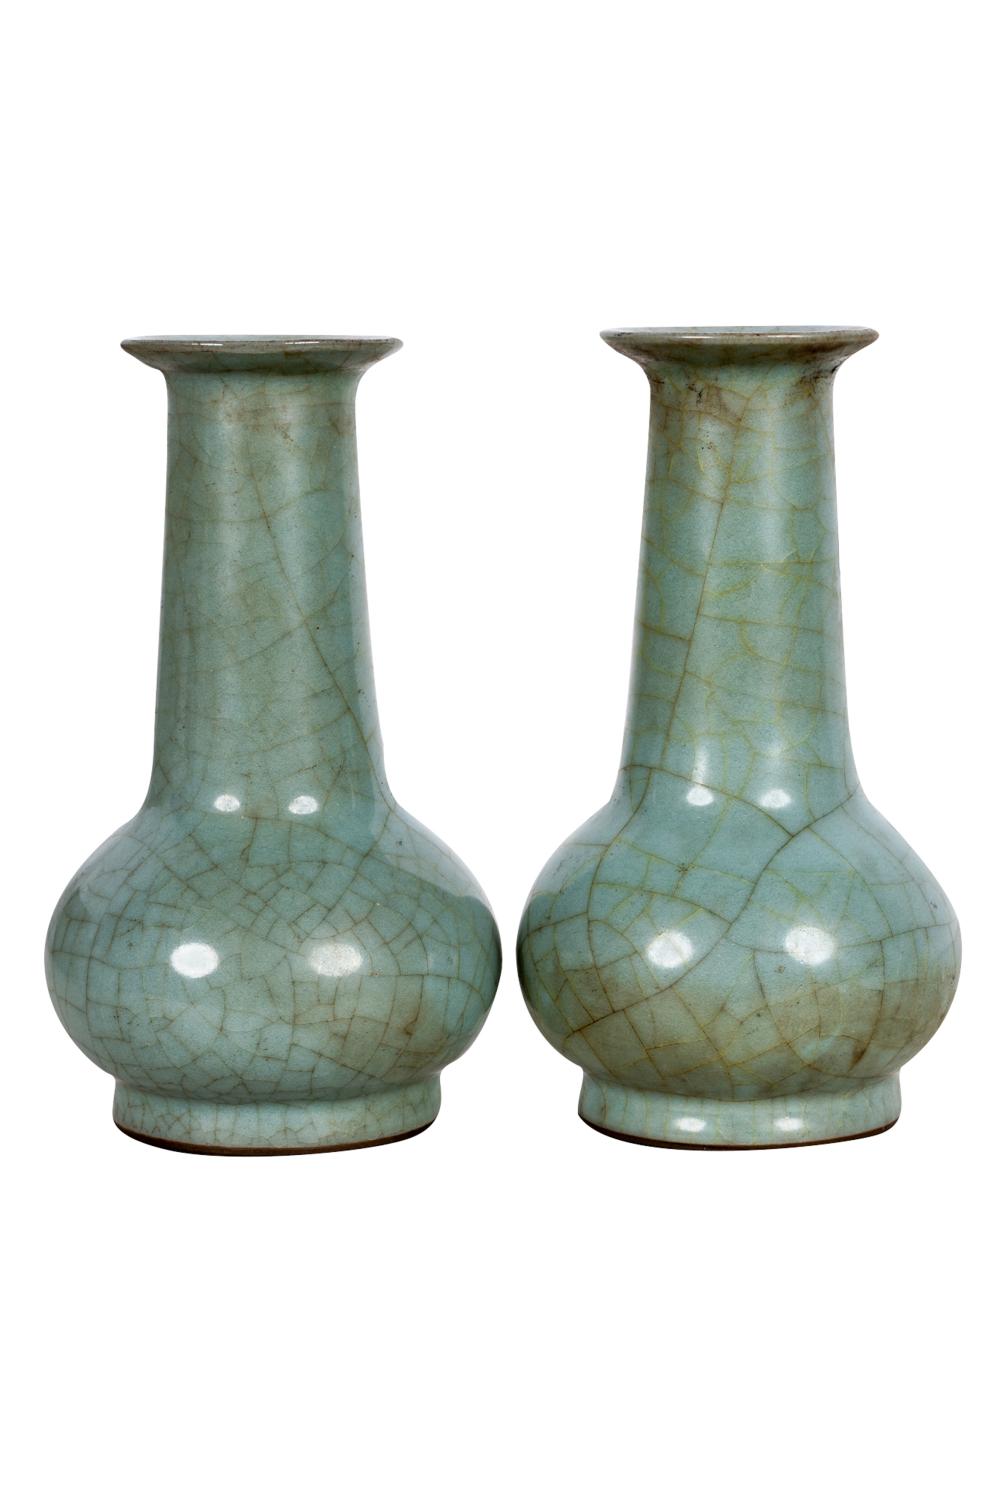 PAIR OF CHINESE CELADON VASESeach 332a61